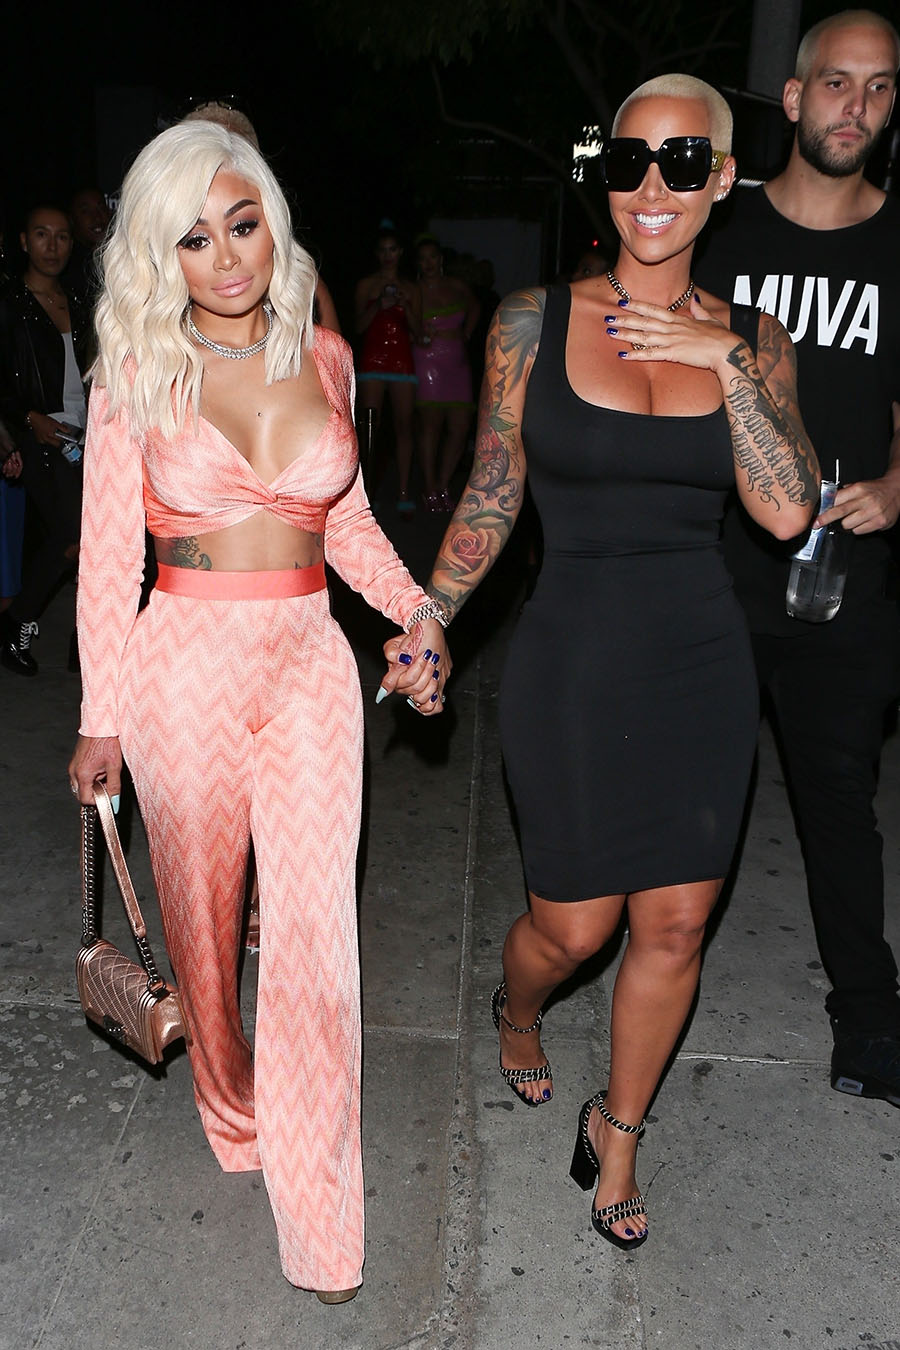 Celebs Out & About: Blac Chyna & Amber Rose Launch New Line